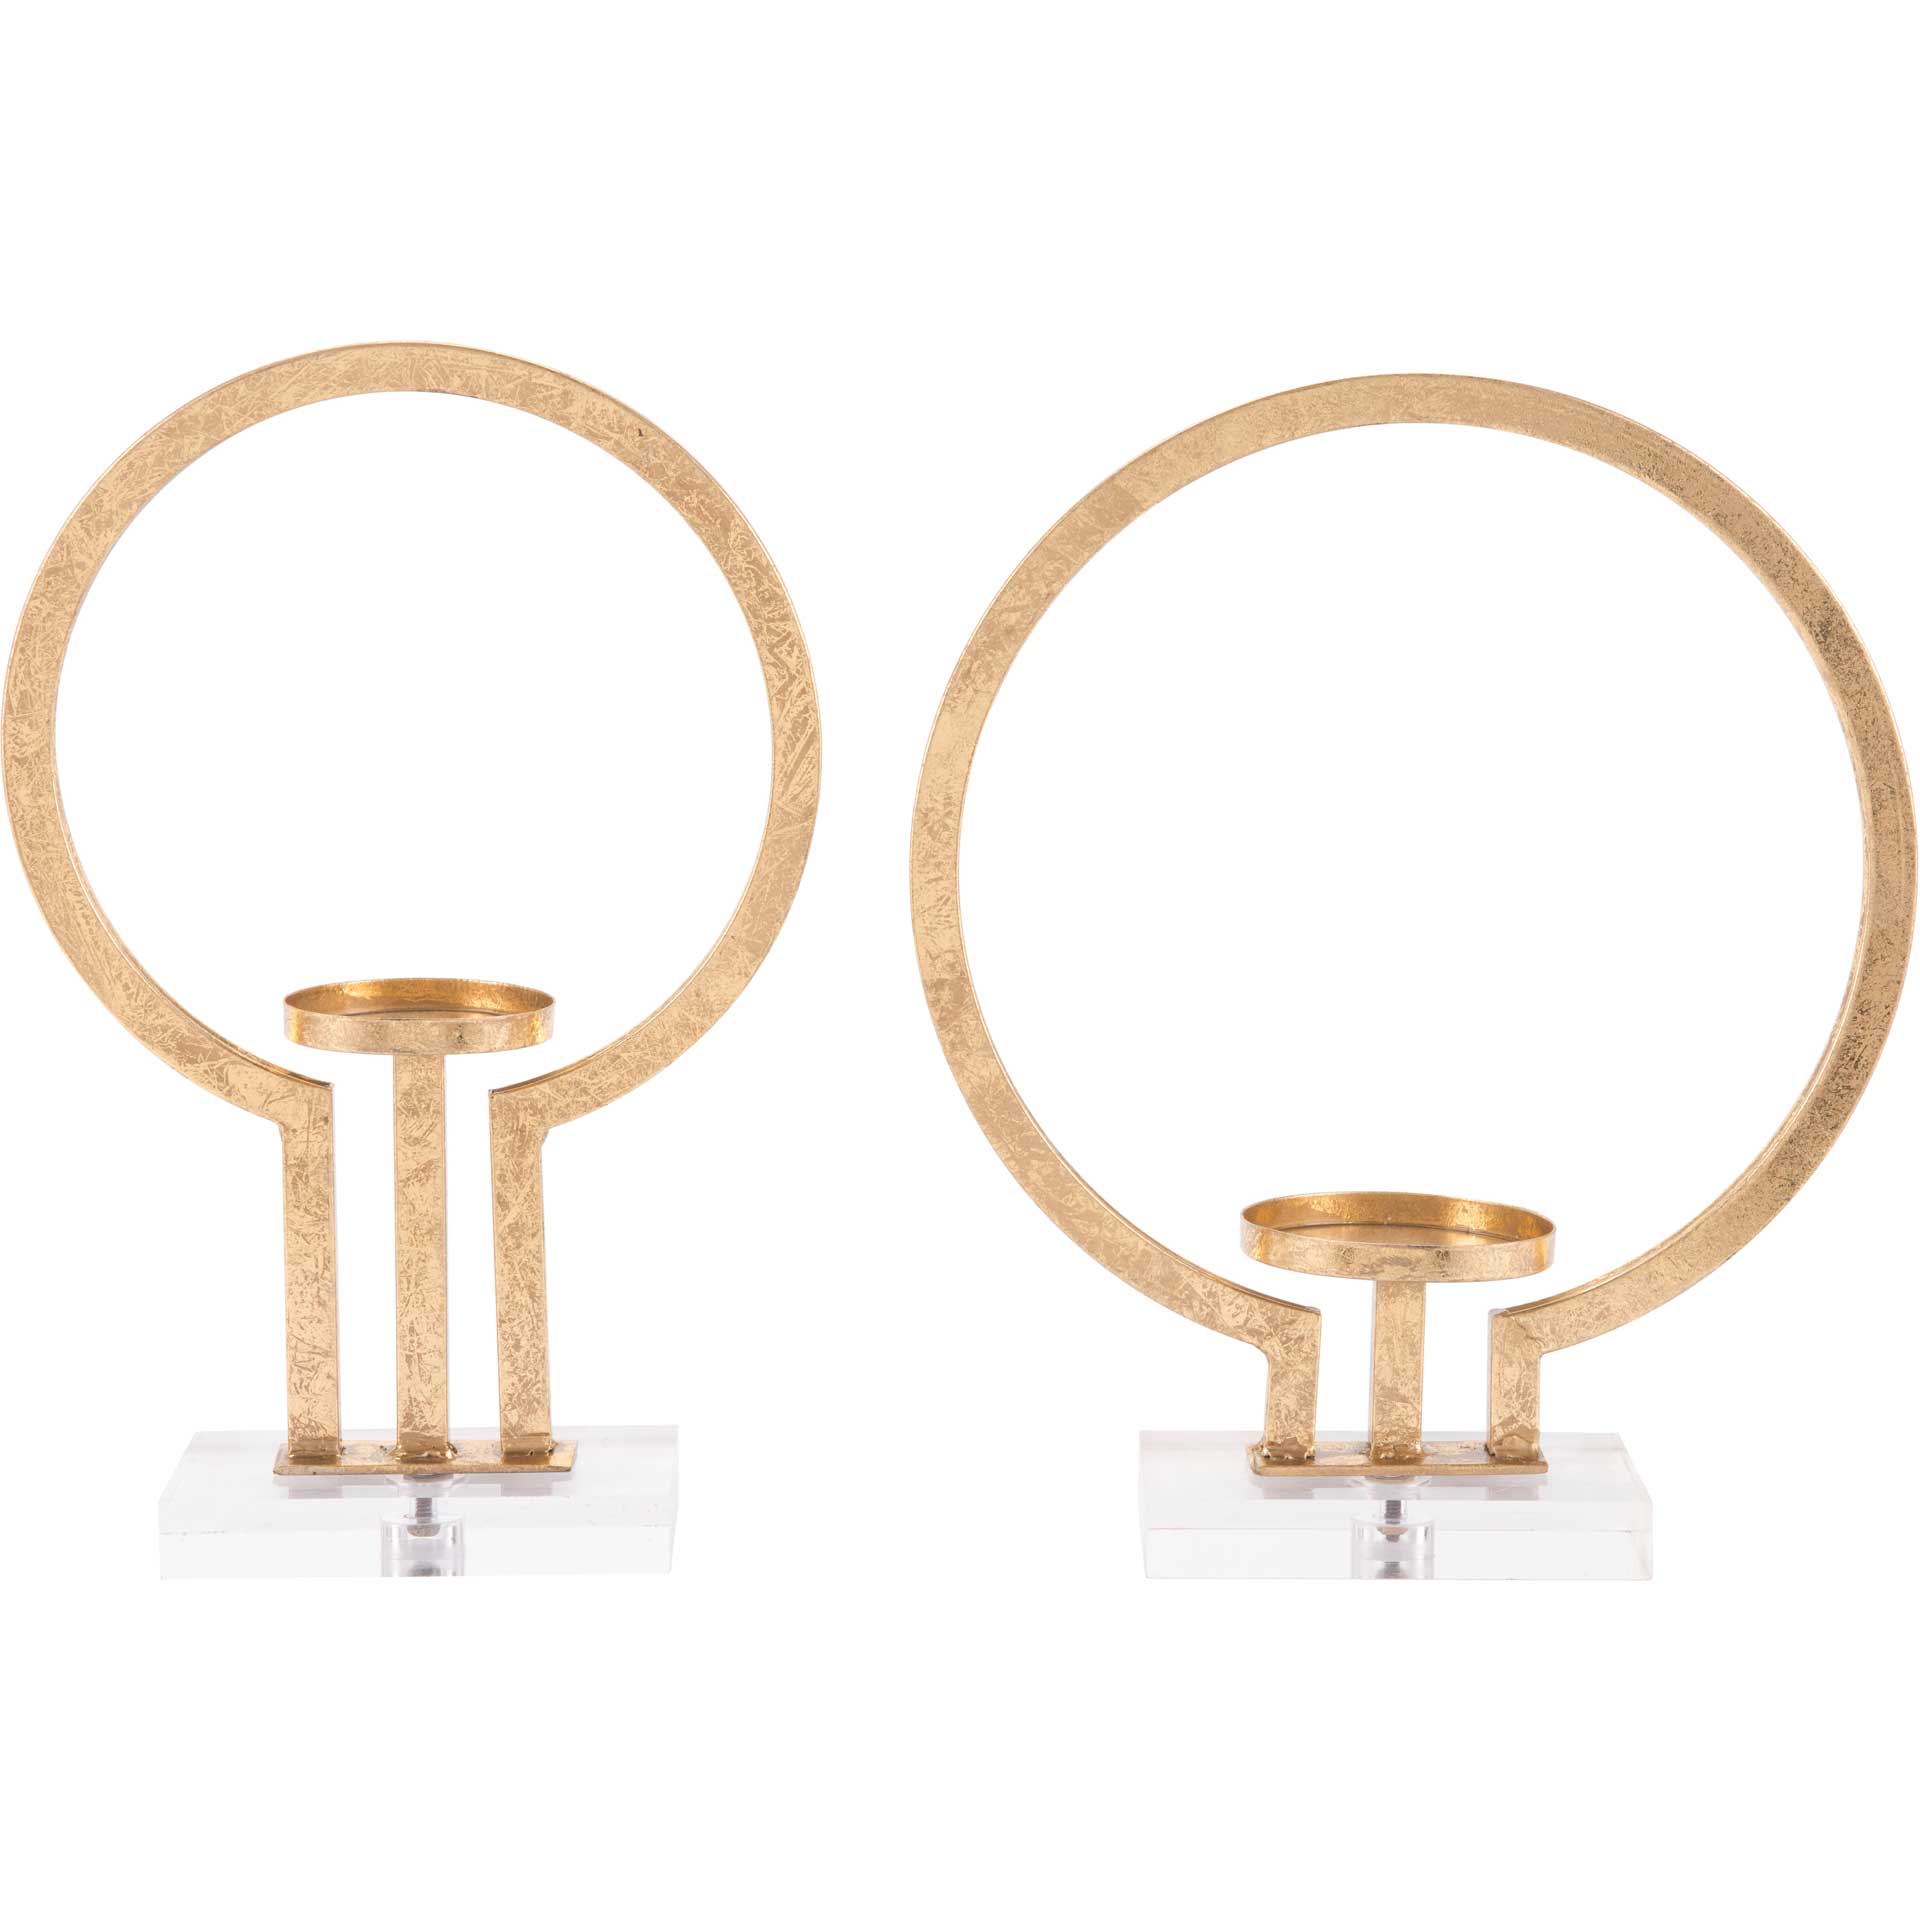 Oly Candle Holders Gold (Set of 2)